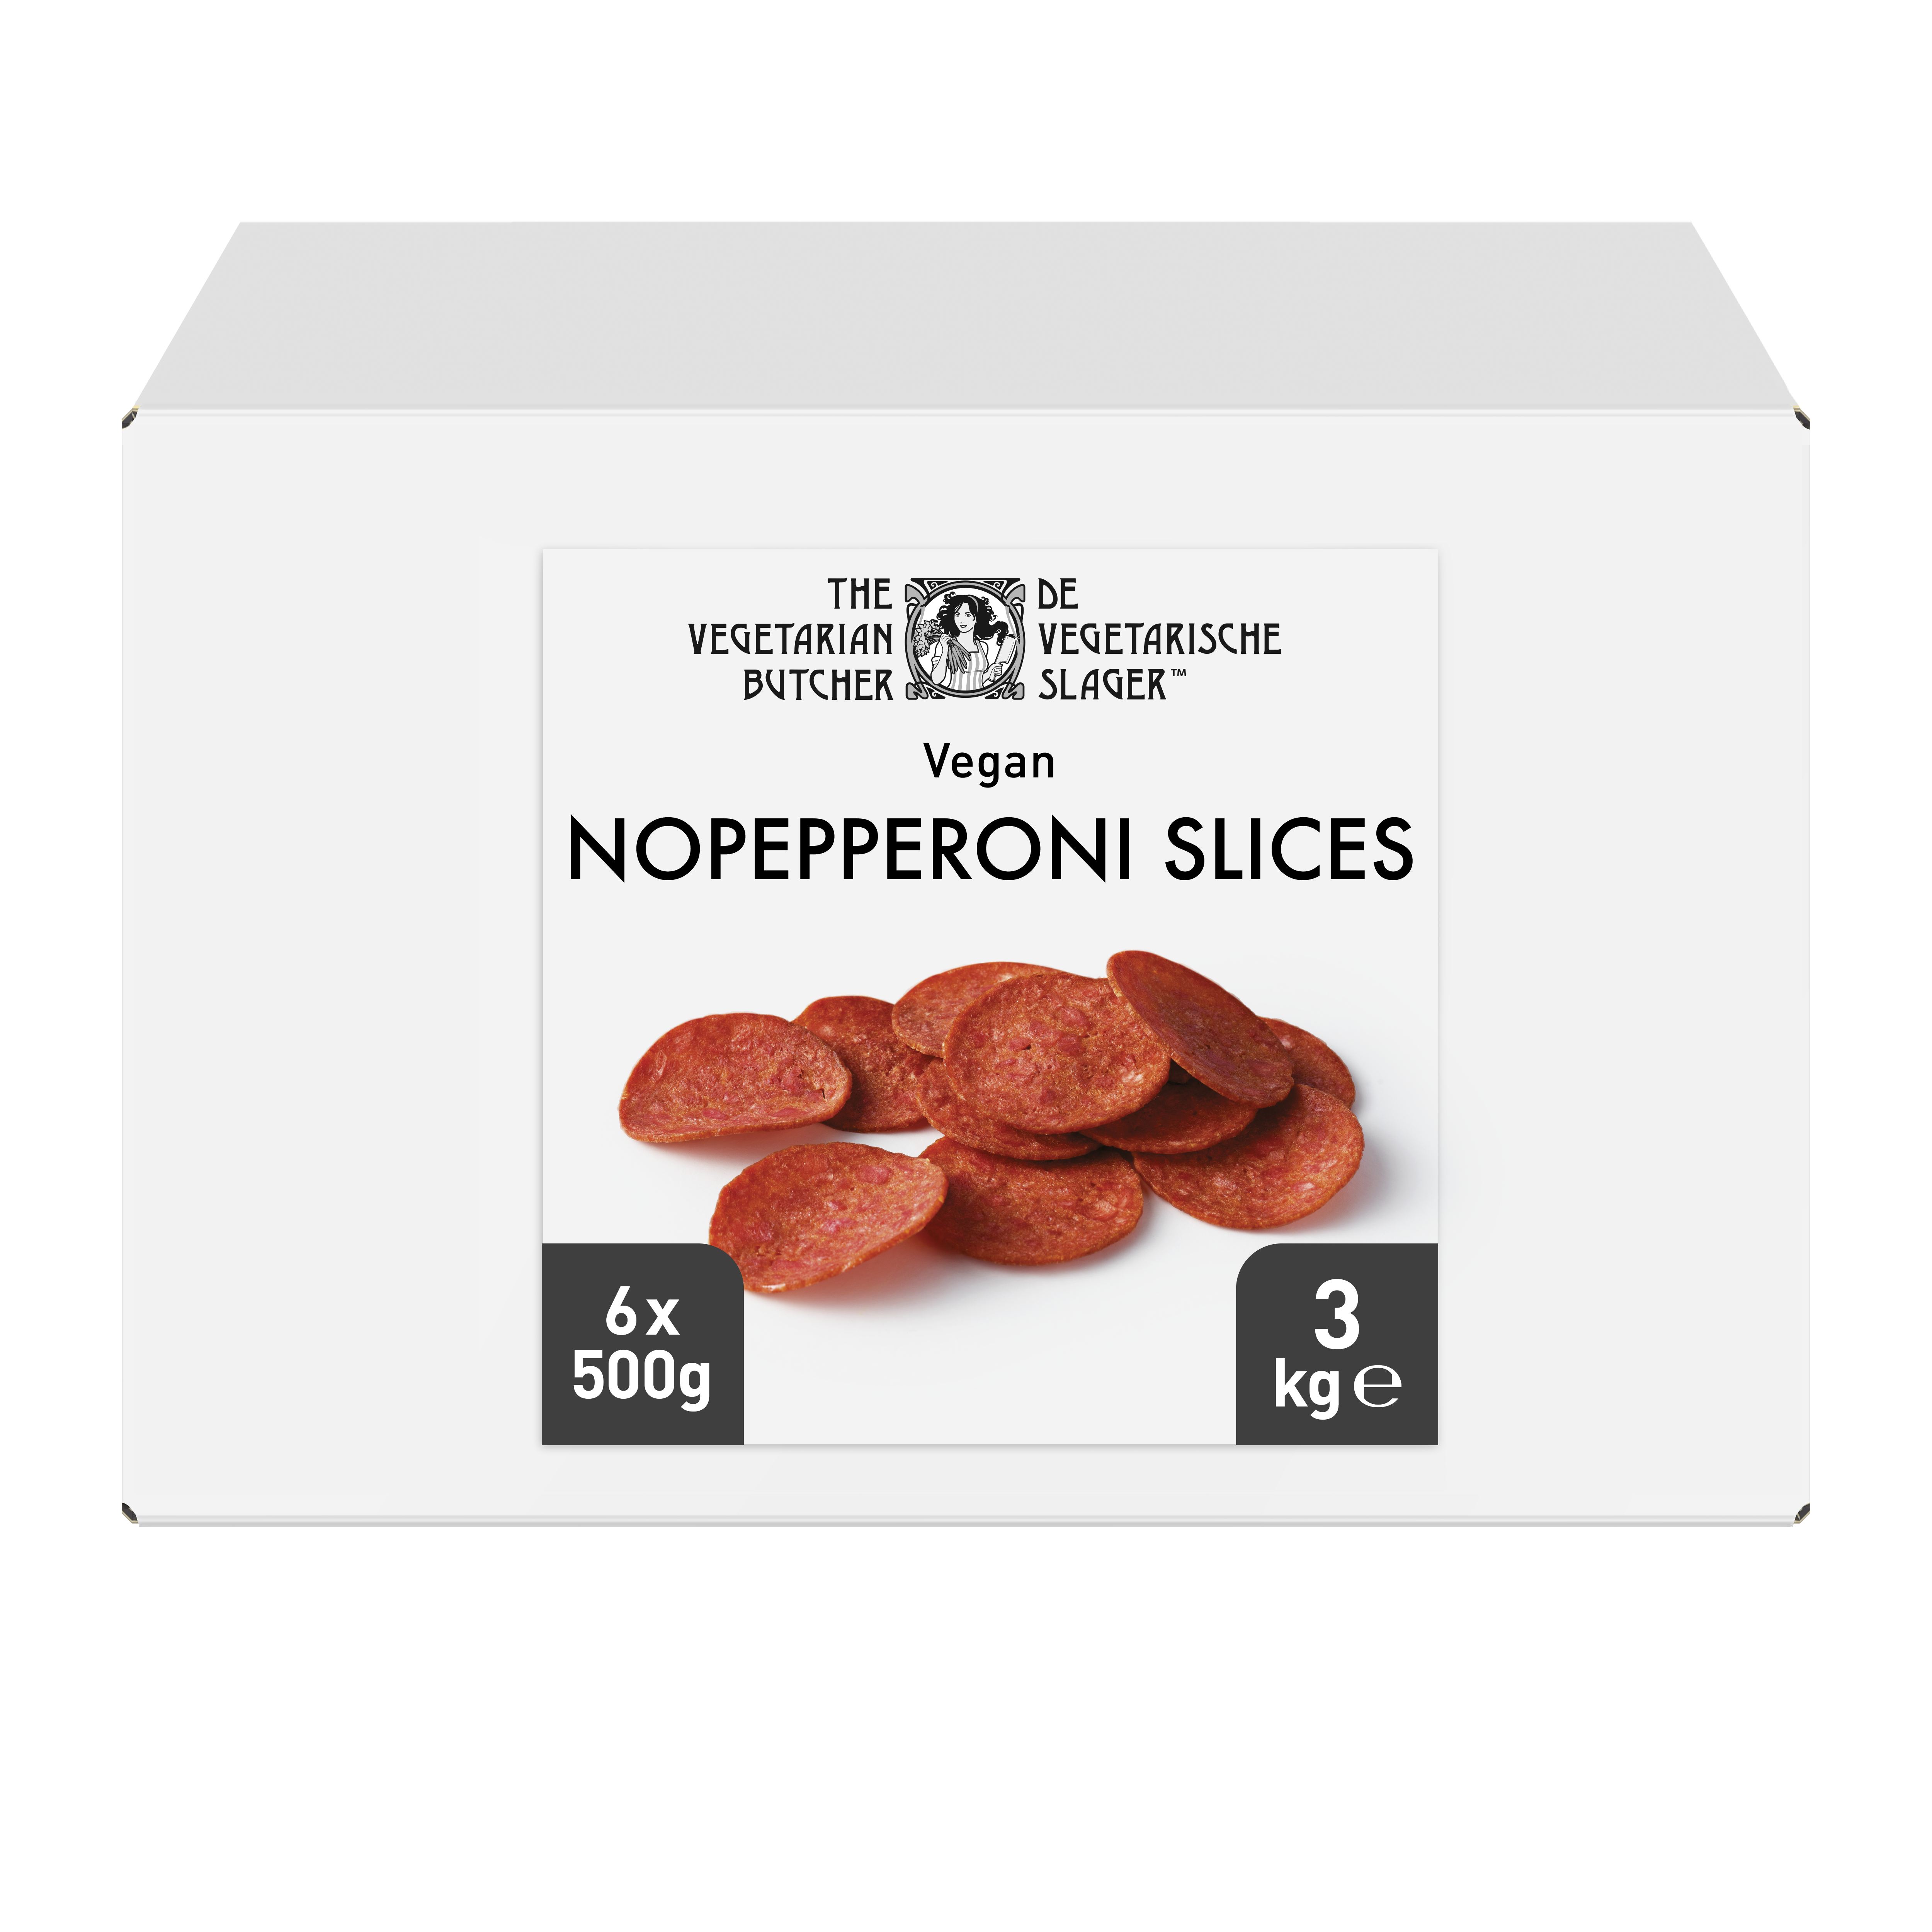 The Vegetarian Butcher NoPepperoni Slices 6 x 500 g - 